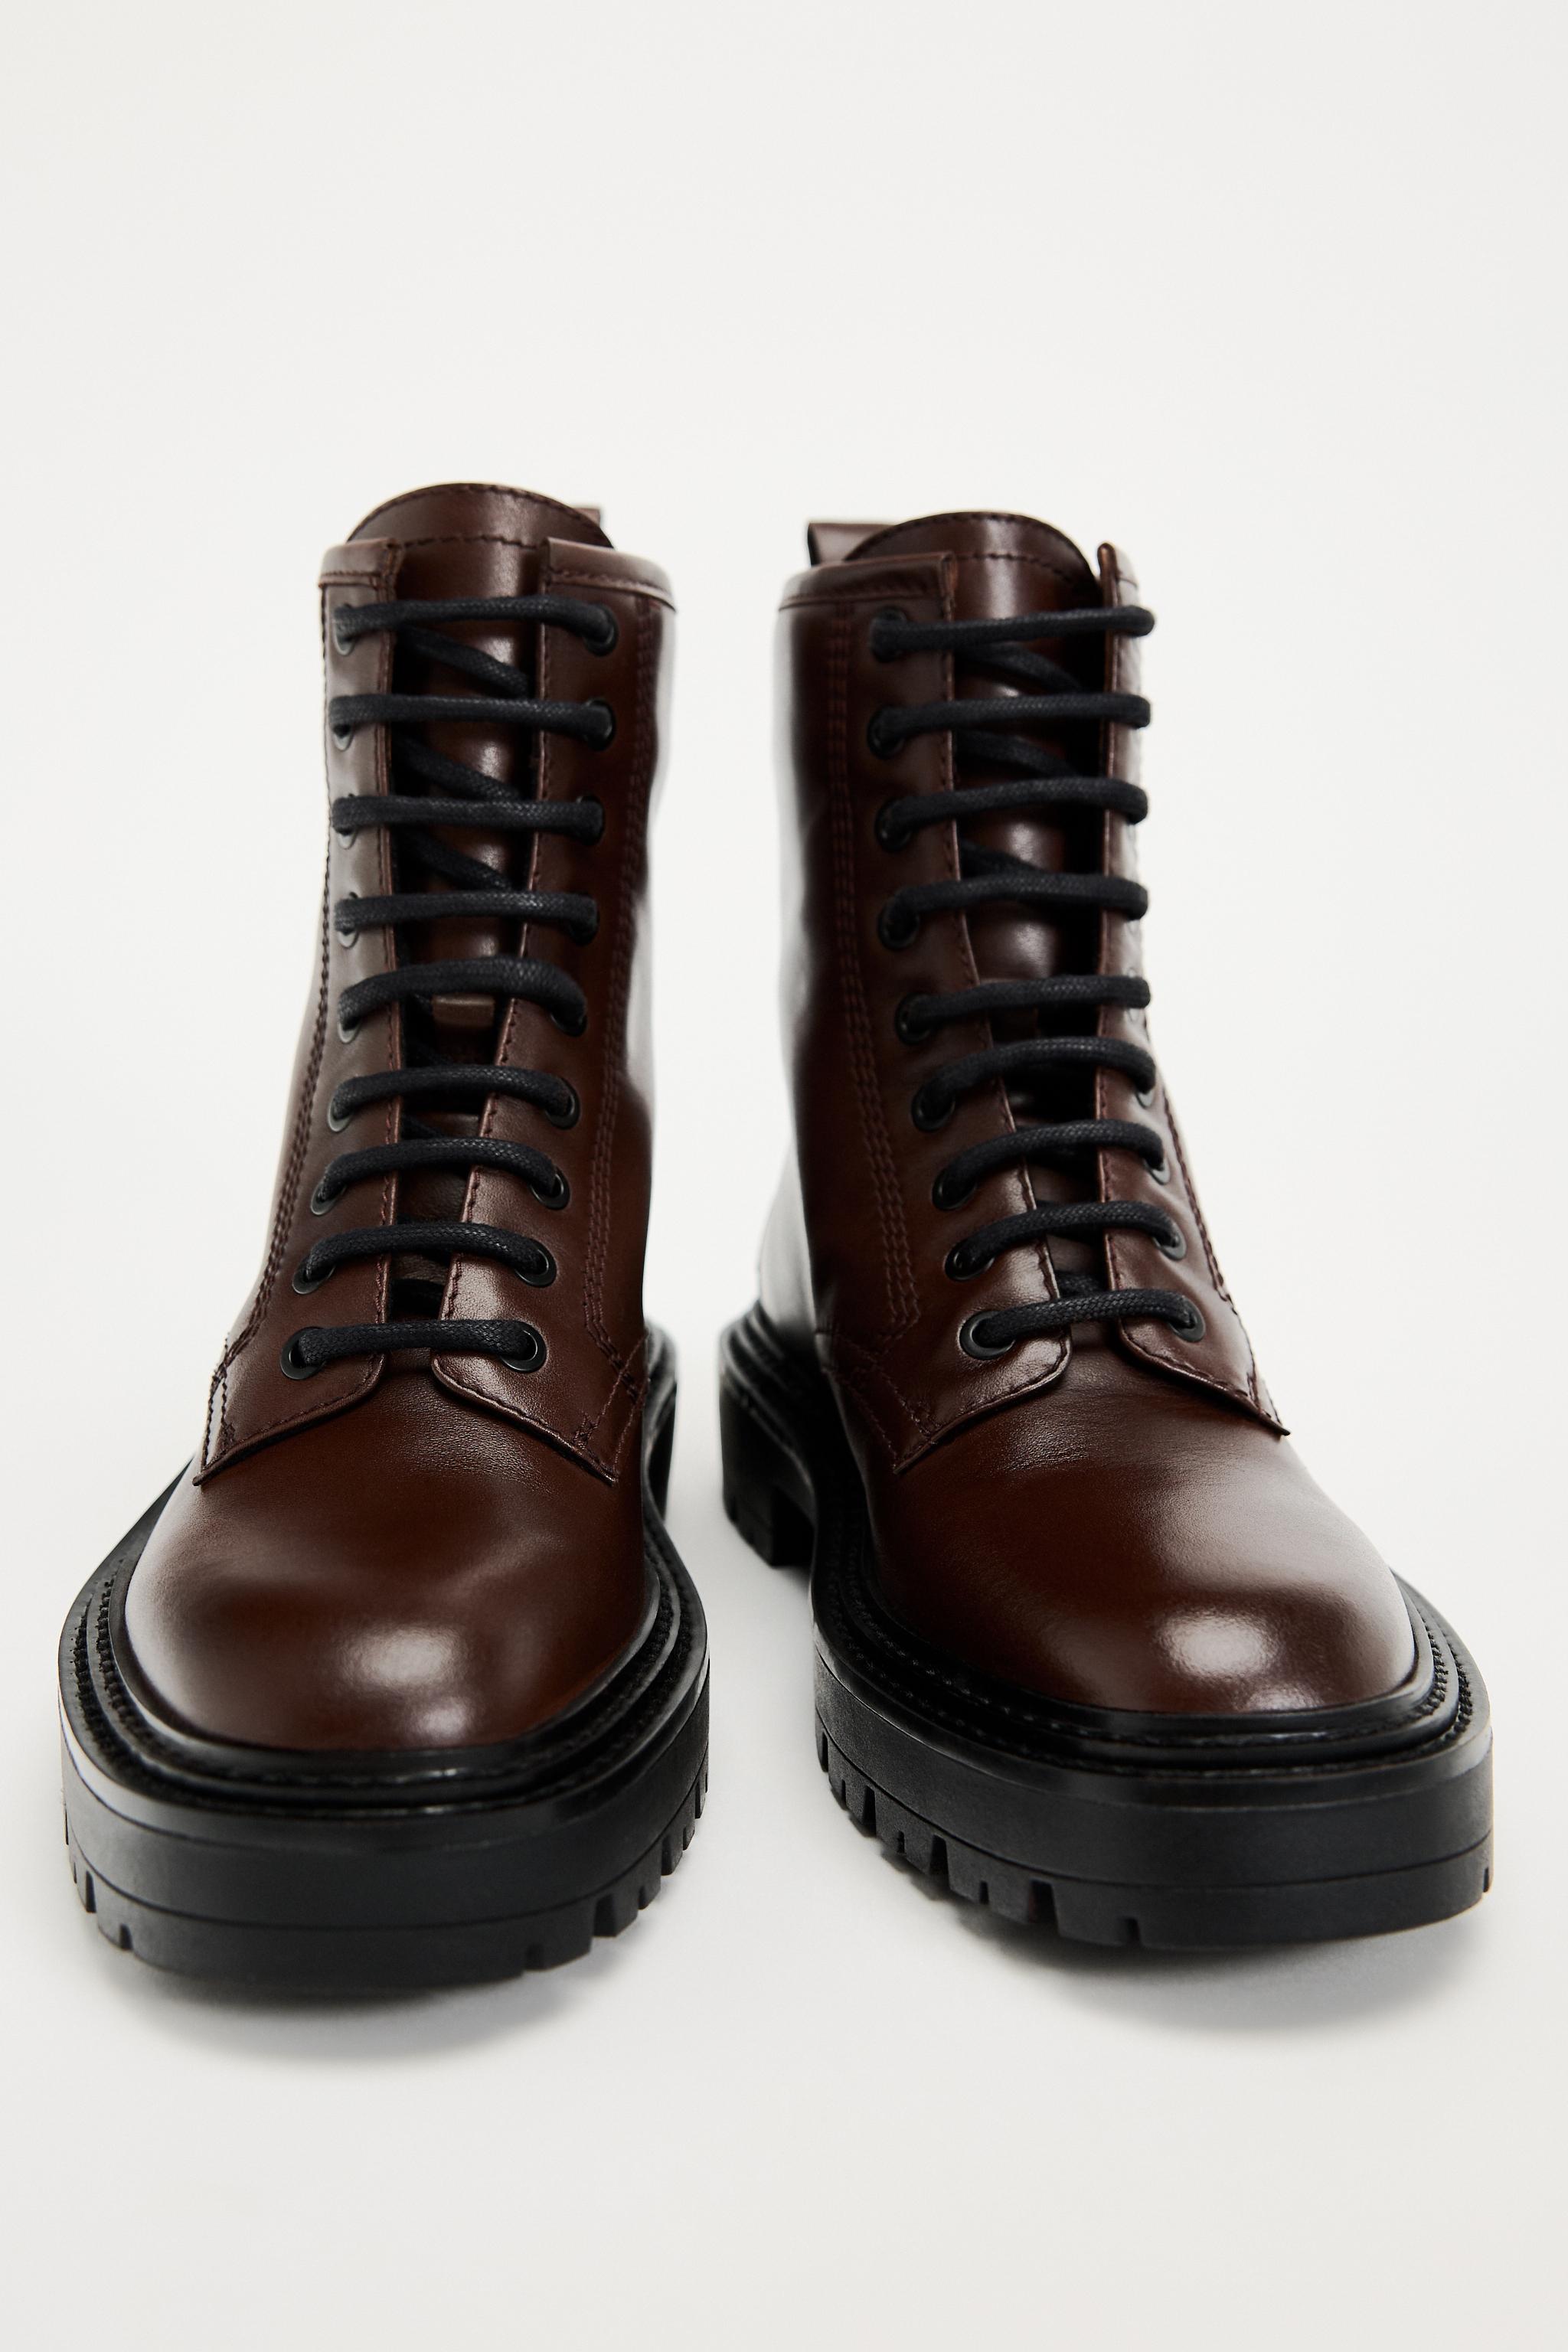 LACE-UP LEATHER ANKLE BOOTS - Chocolate Brown | ZARA United States